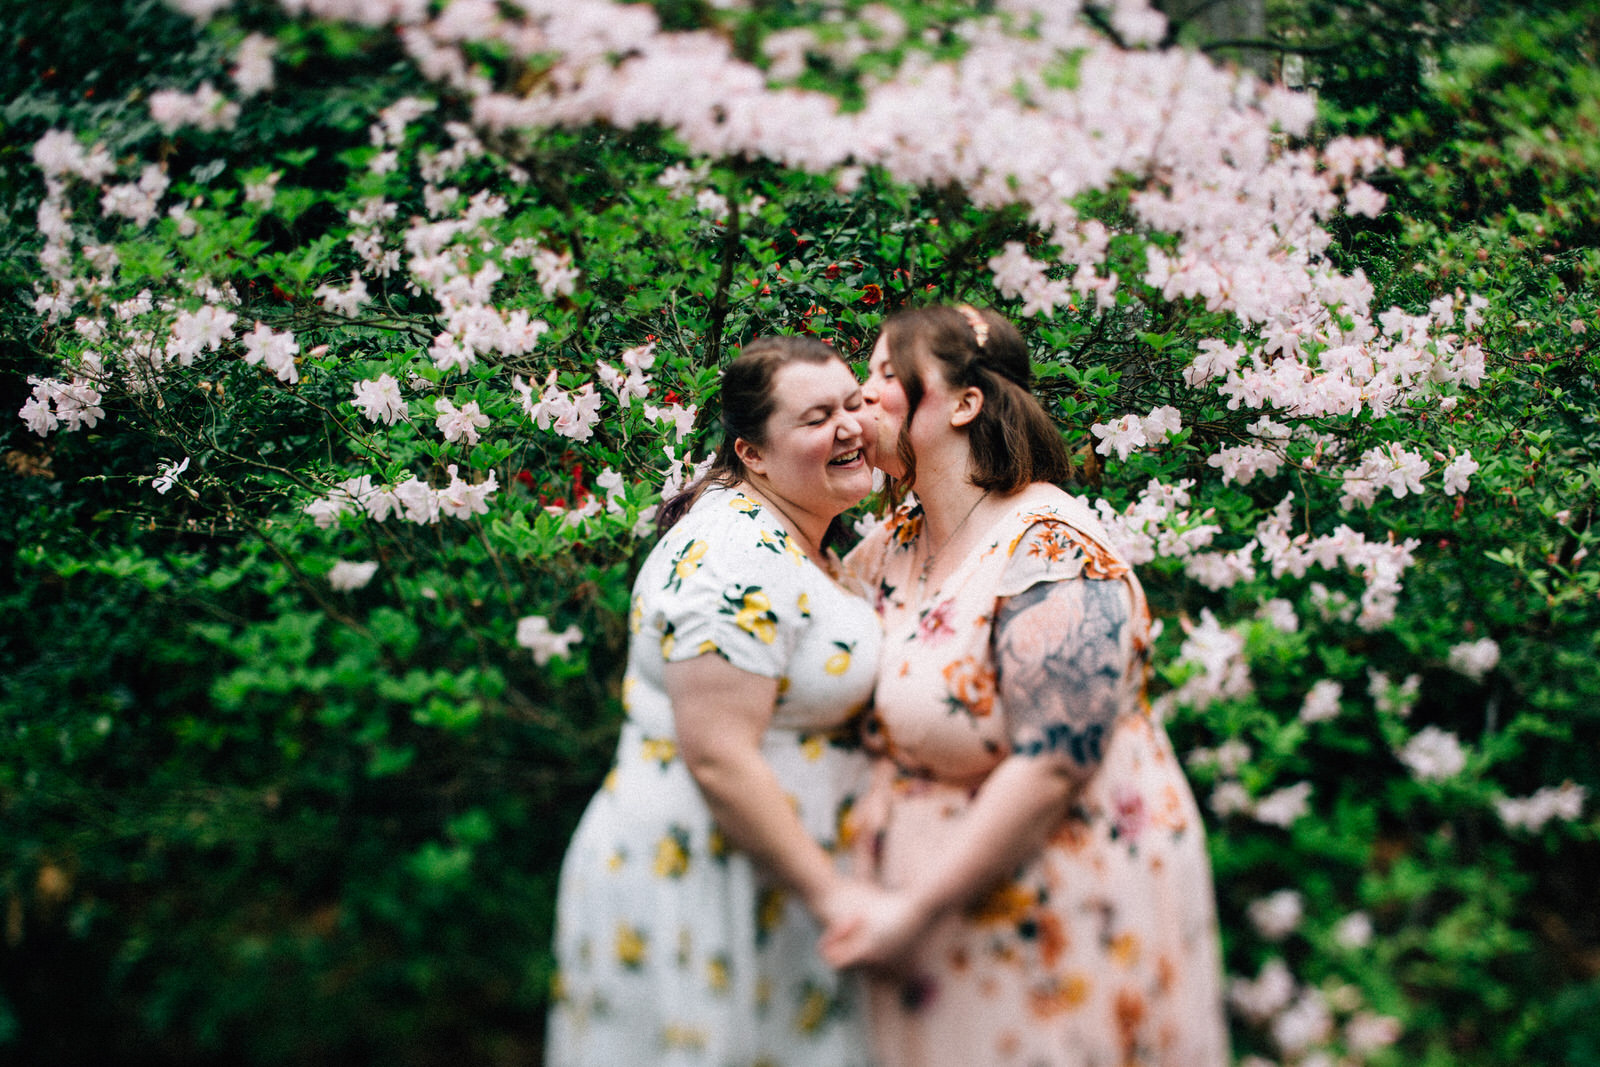 spring cherry blossom seattle engagement session couples lesbian lgbt lgbtq queer outdoor natural light tacoma portland fuck yeah weddings kendall lauren shea feminist photographer